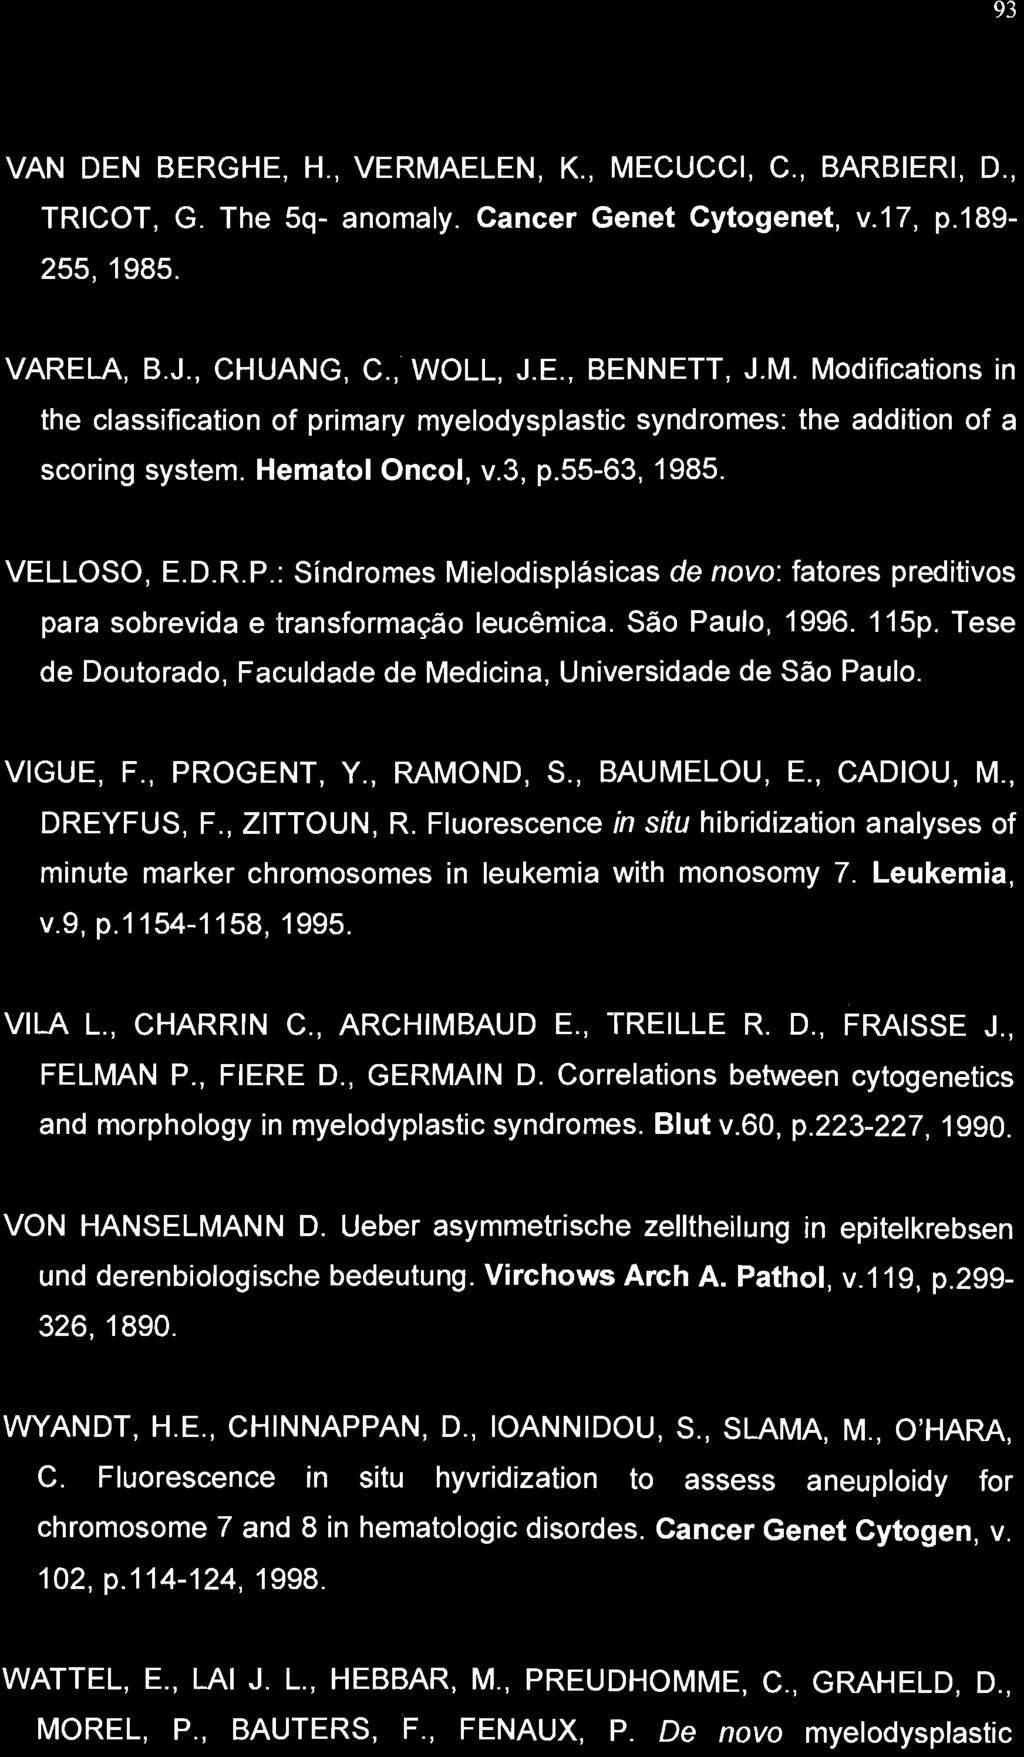 93 VAN DEN BERGHE, H., VERMAELEN, K., MECUCCI, C., BARBIERI, D., TRICOT, G. The 5q- anomaly. Cancer Genet Cytogenet, v.17, p.189-255,1985. VARE LA, B.J., CHUANG, C., WOLL, J.E., BENNETT, J.M. Modifications in the classification of primary myelodysplastic syndromes: the addition of a scoring system.